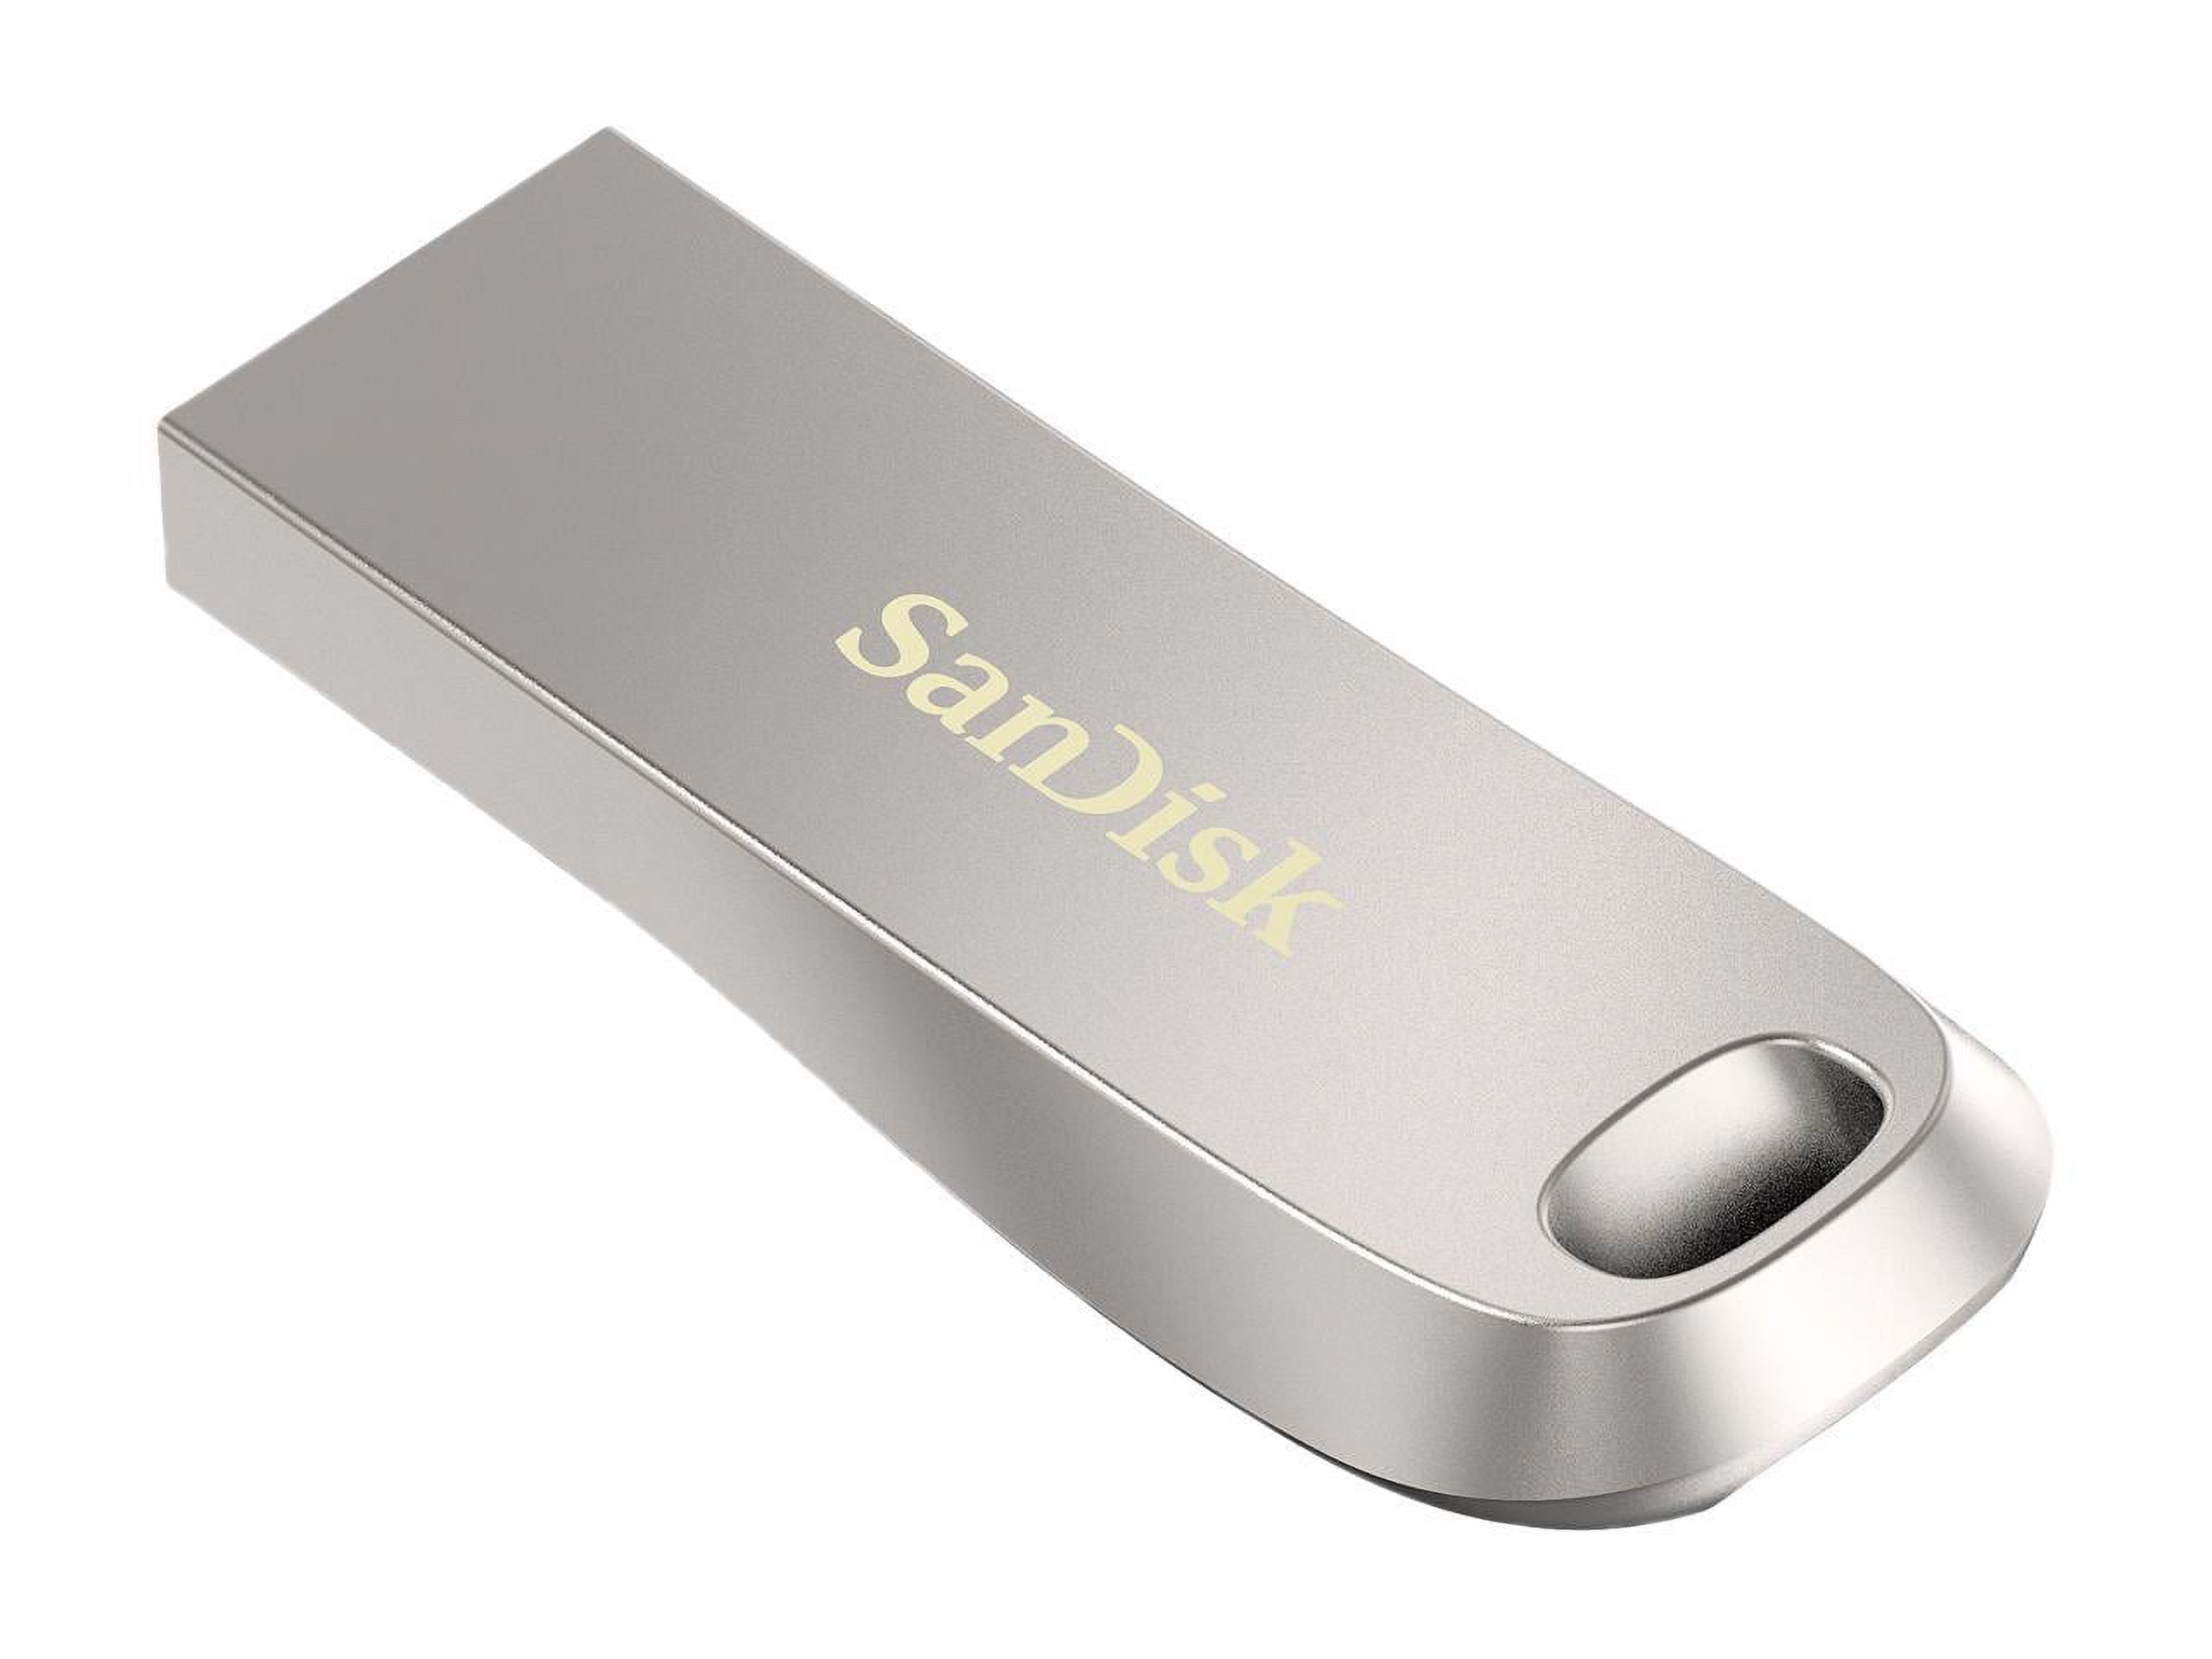 SanDisk 64GB Ultra Luxe USB 3.1 Flash Drive, Speed Up to 150MB/s (SDCZ74-064G-G46) - image 2 of 5